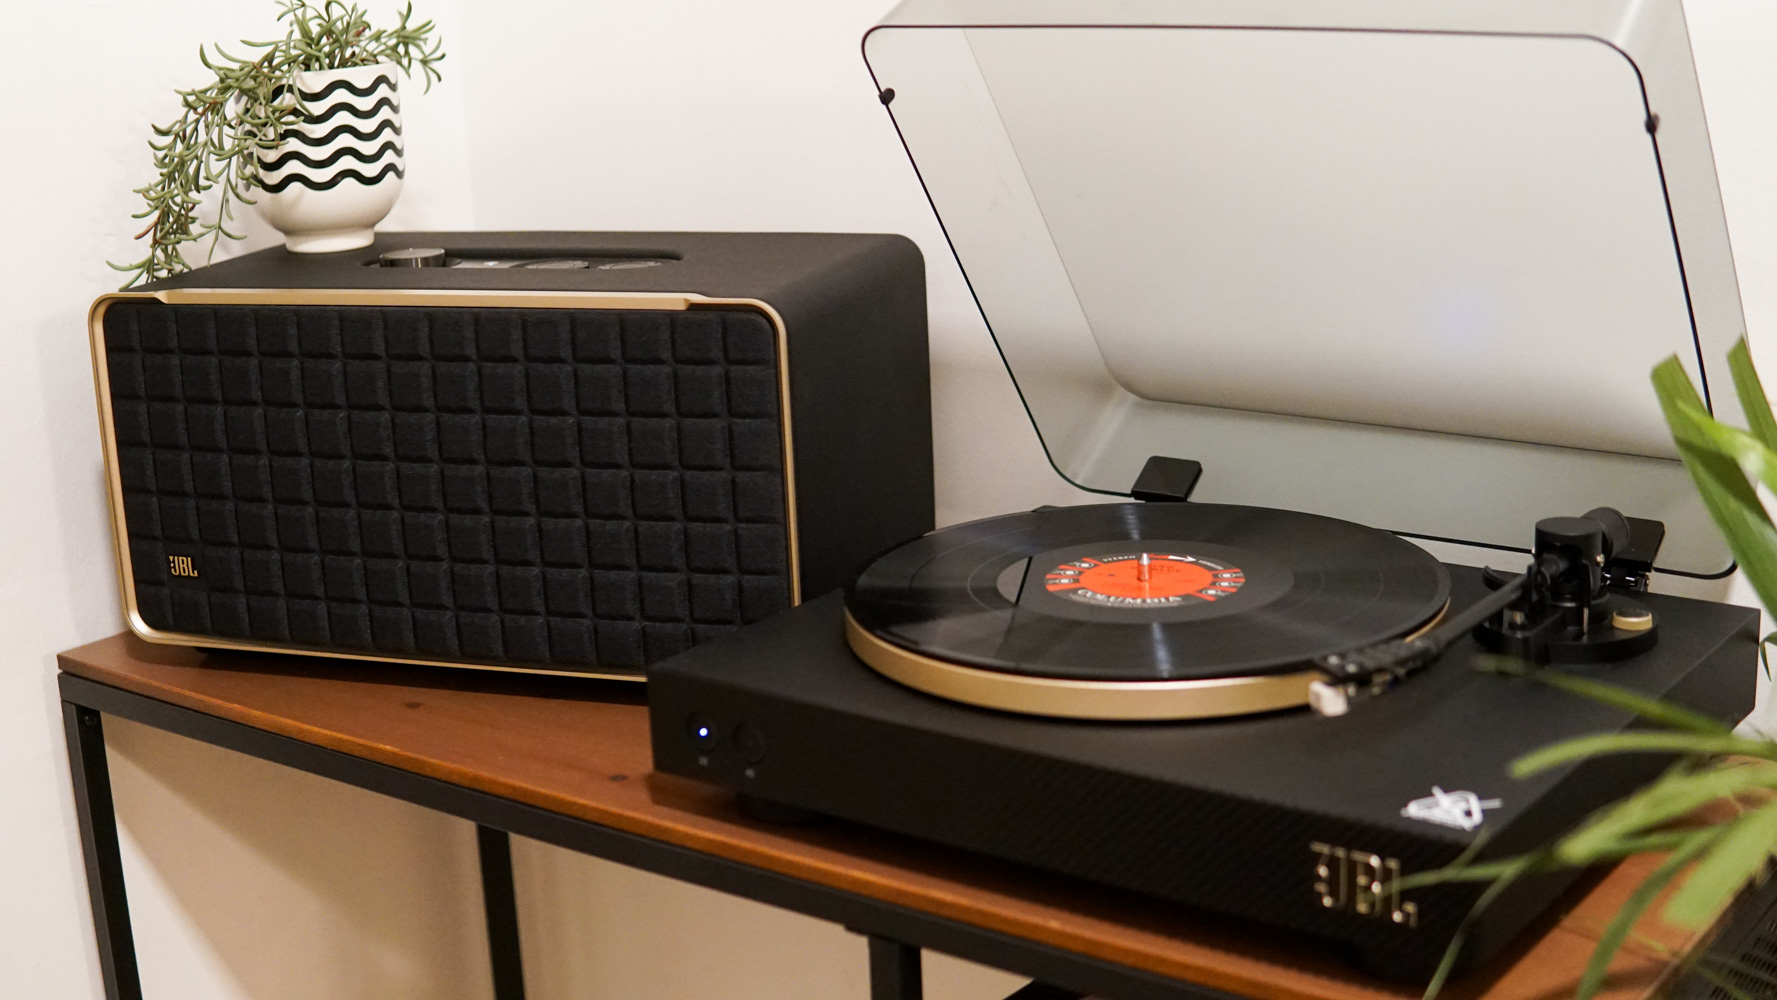 Vinyl Record Fan? You’ll Want This Gorgeous Speaker and Turntable Combo From JBL